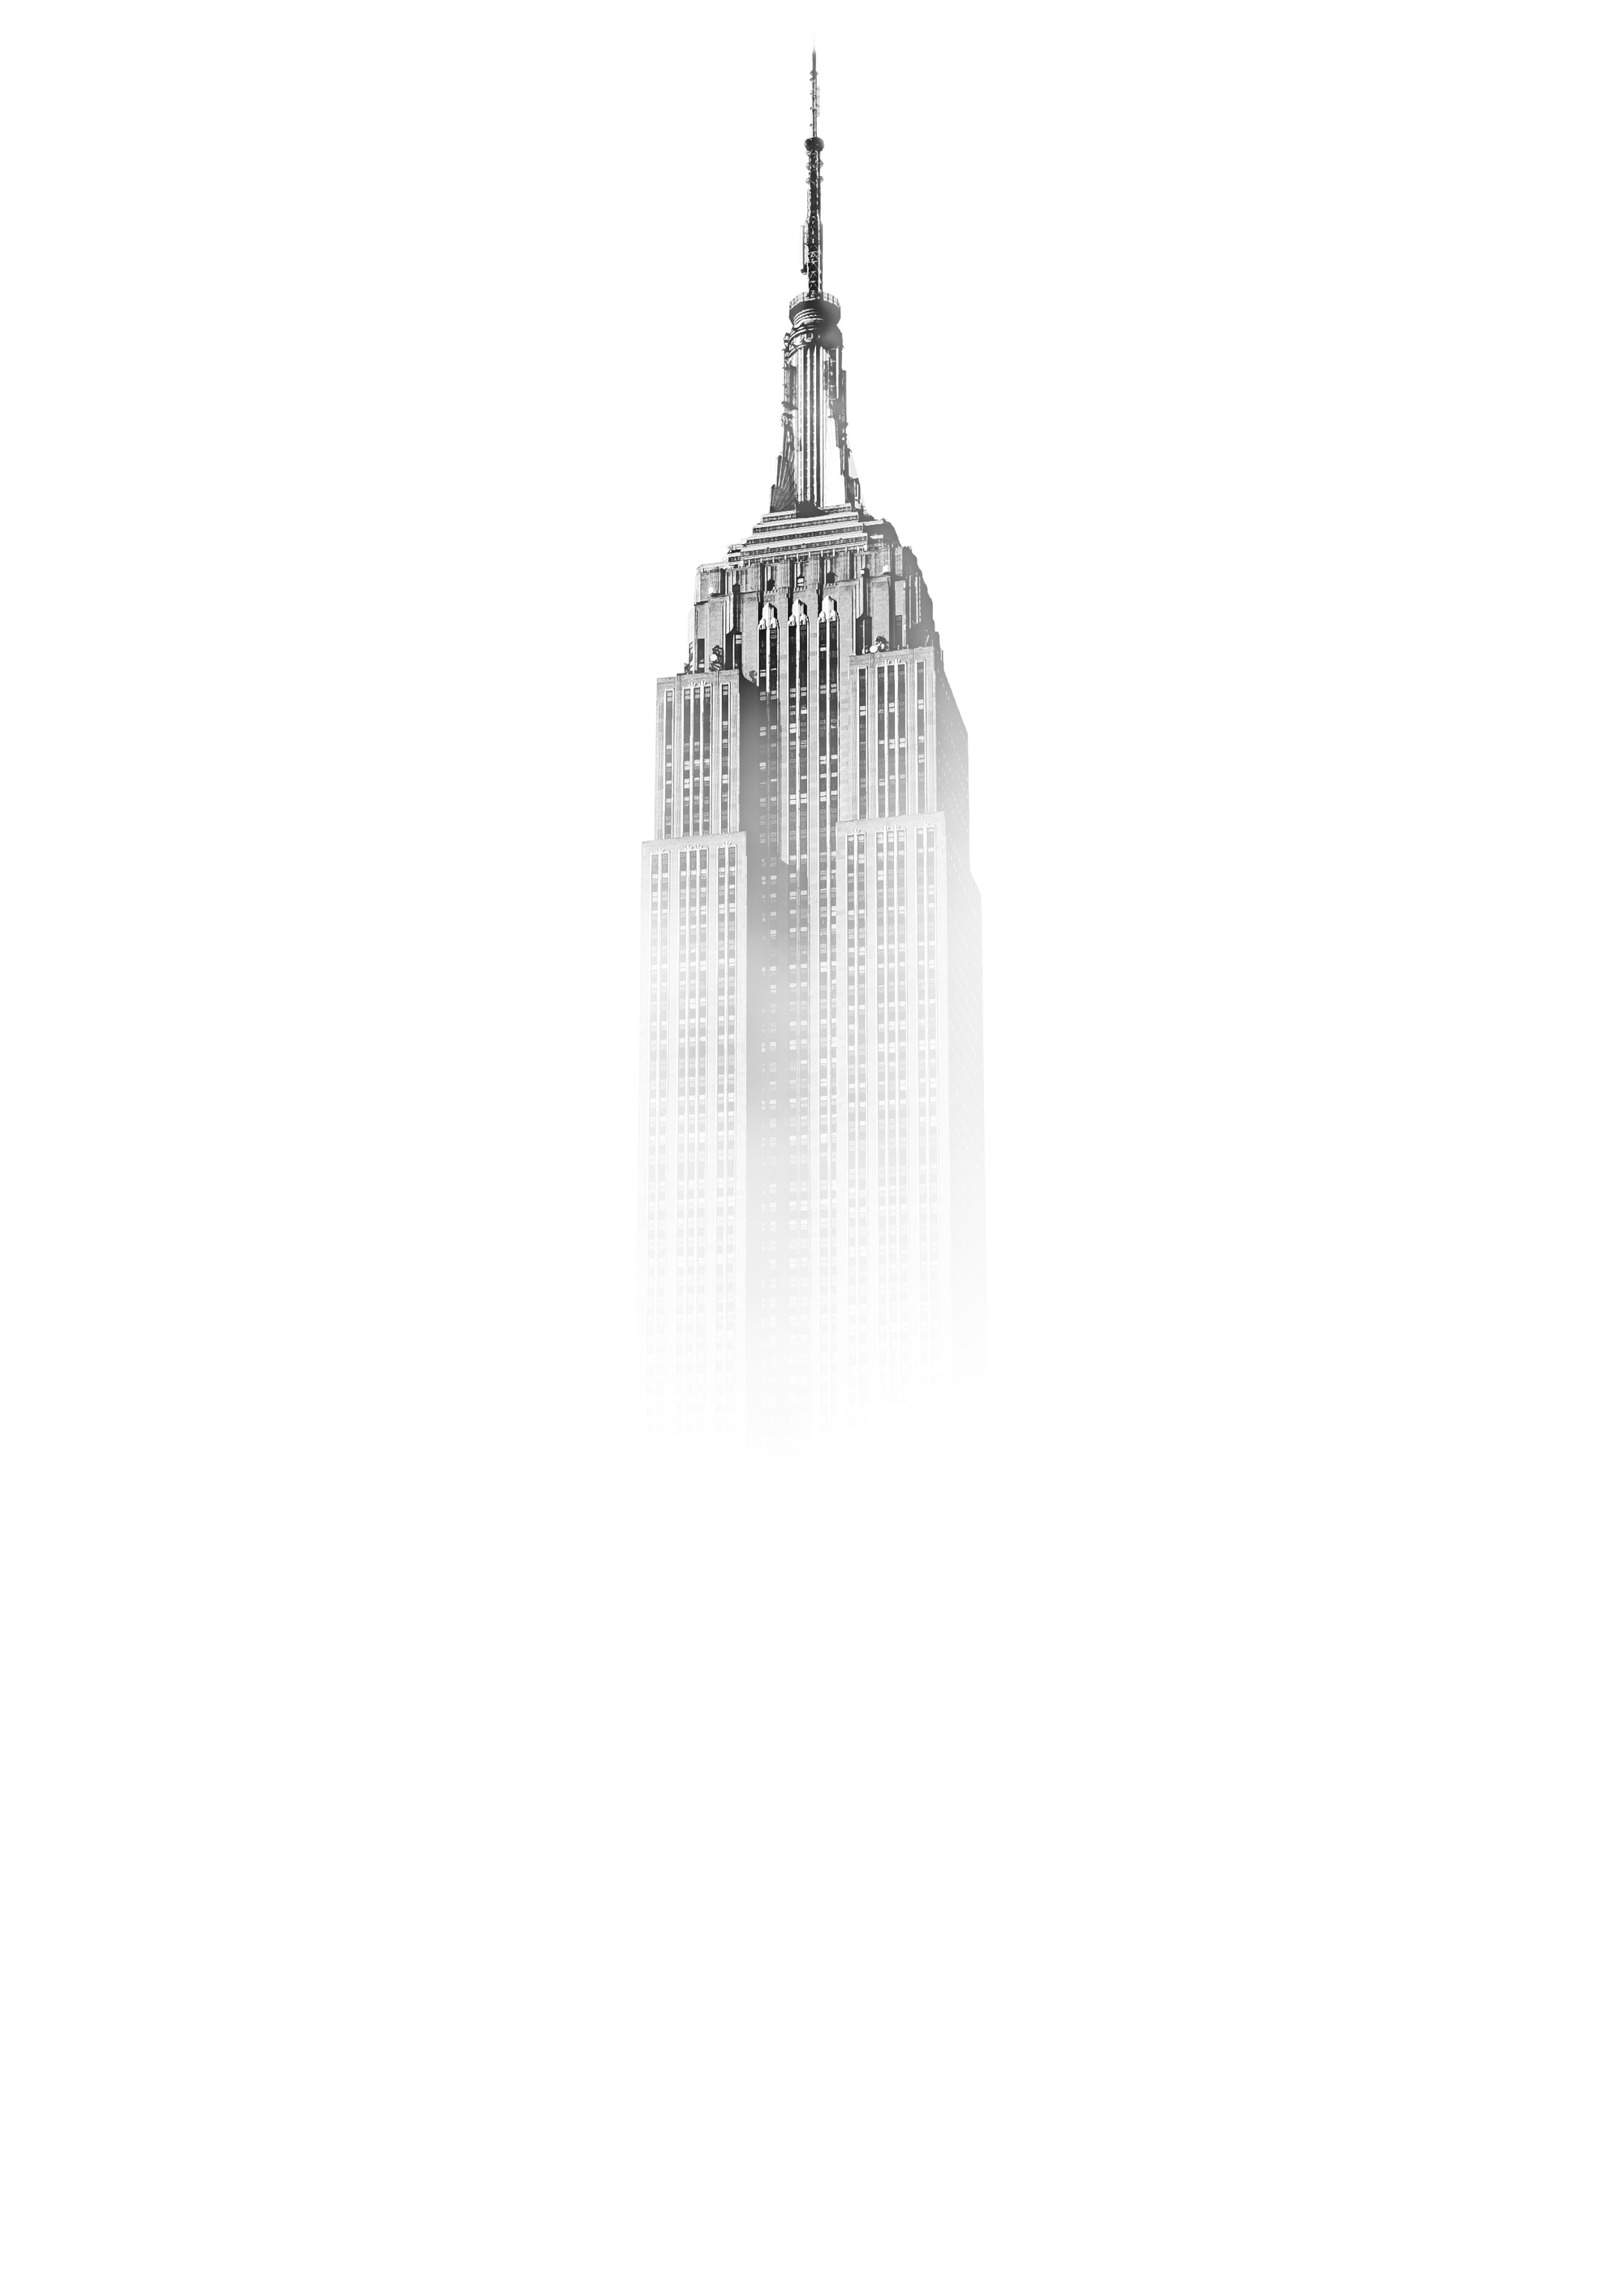 Picture of the top of the empire state building in fog.